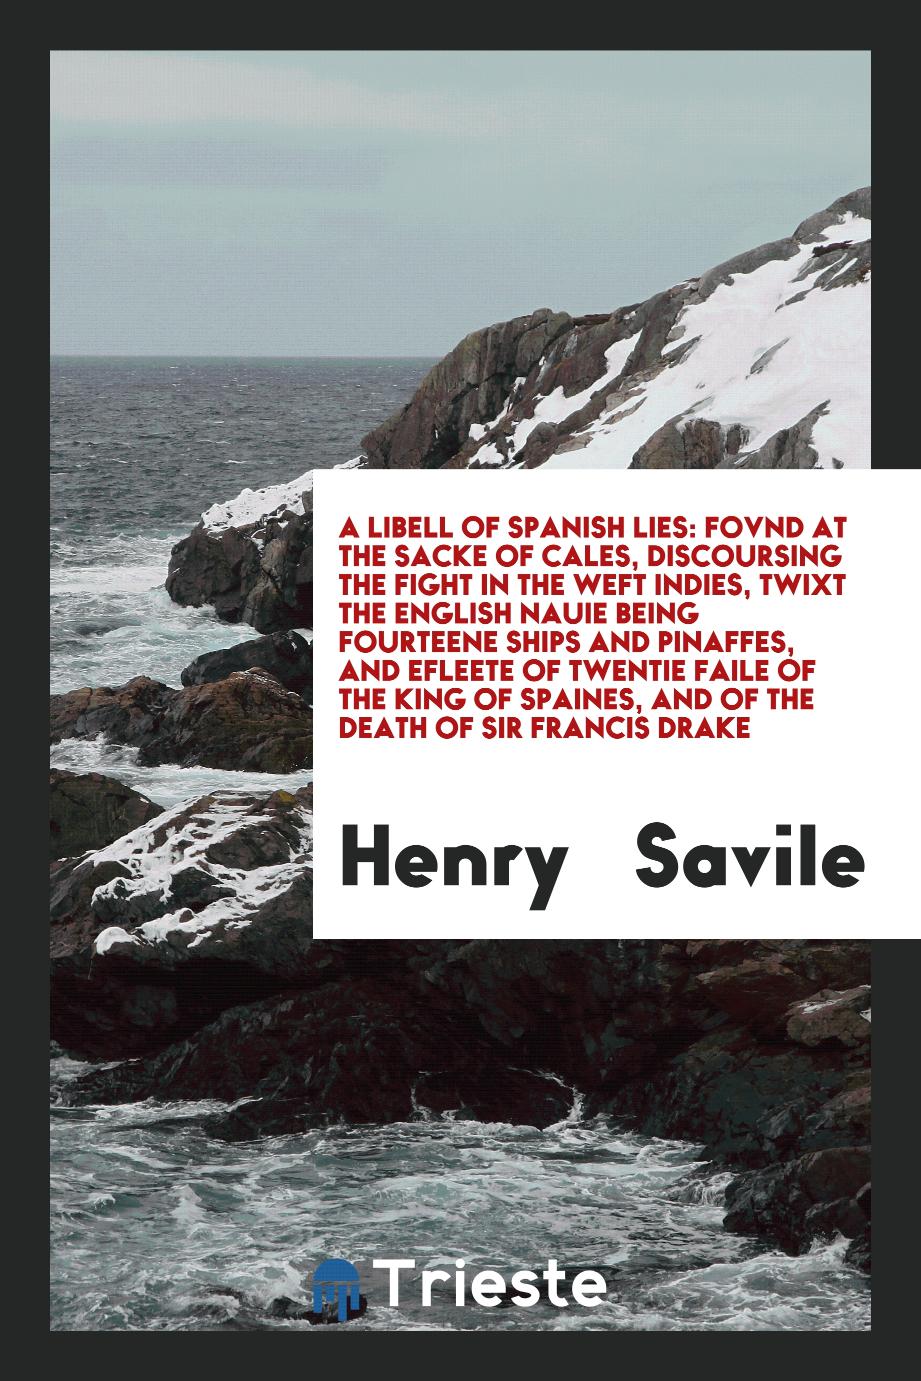 A Libell of Spanish Lies: Fovnd at the Sacke of Cales, Discoursing the Fight in the Weft Indies, twixt the English Nauie being Fourteene Ships and Pinaffes, and efleete of twentie faile of the king of Spaines, and of the death of Sir Francis Drake